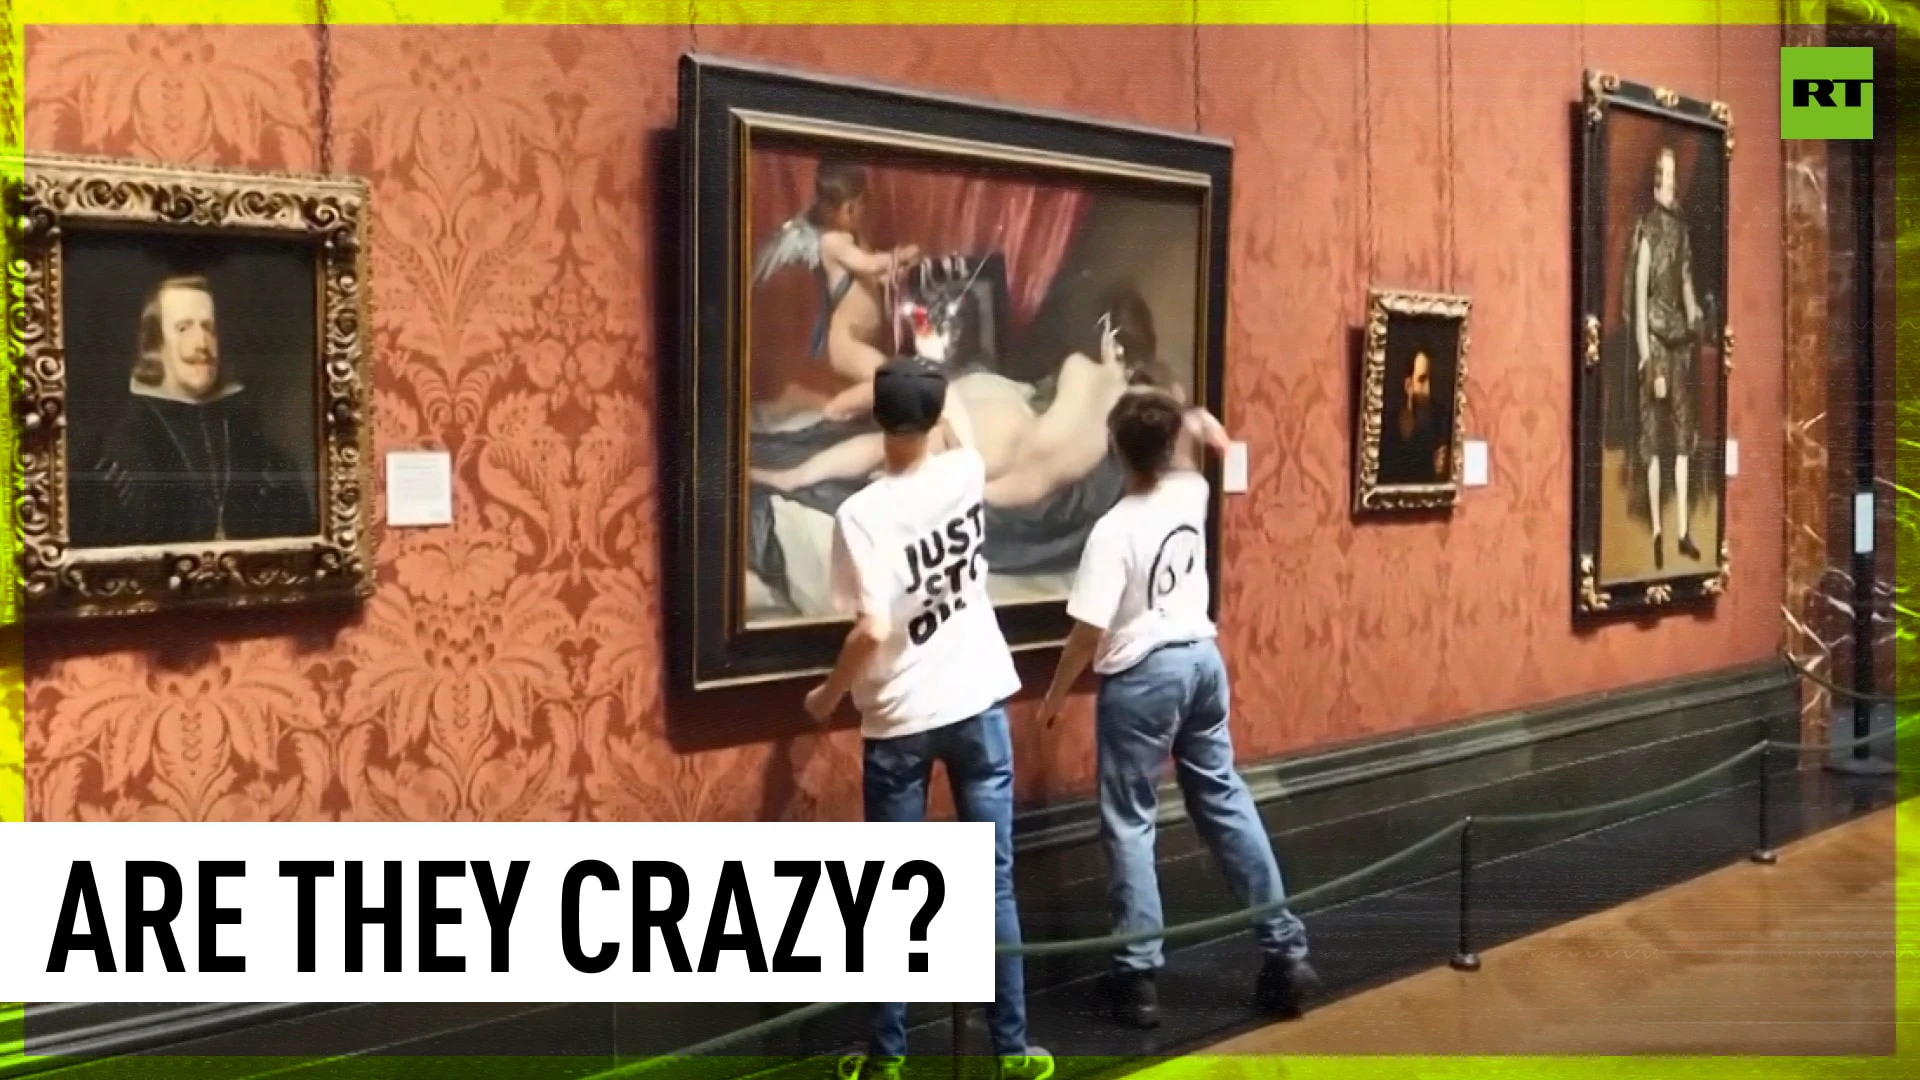 Just Stop Oil activists attack painting at London's National Gallery